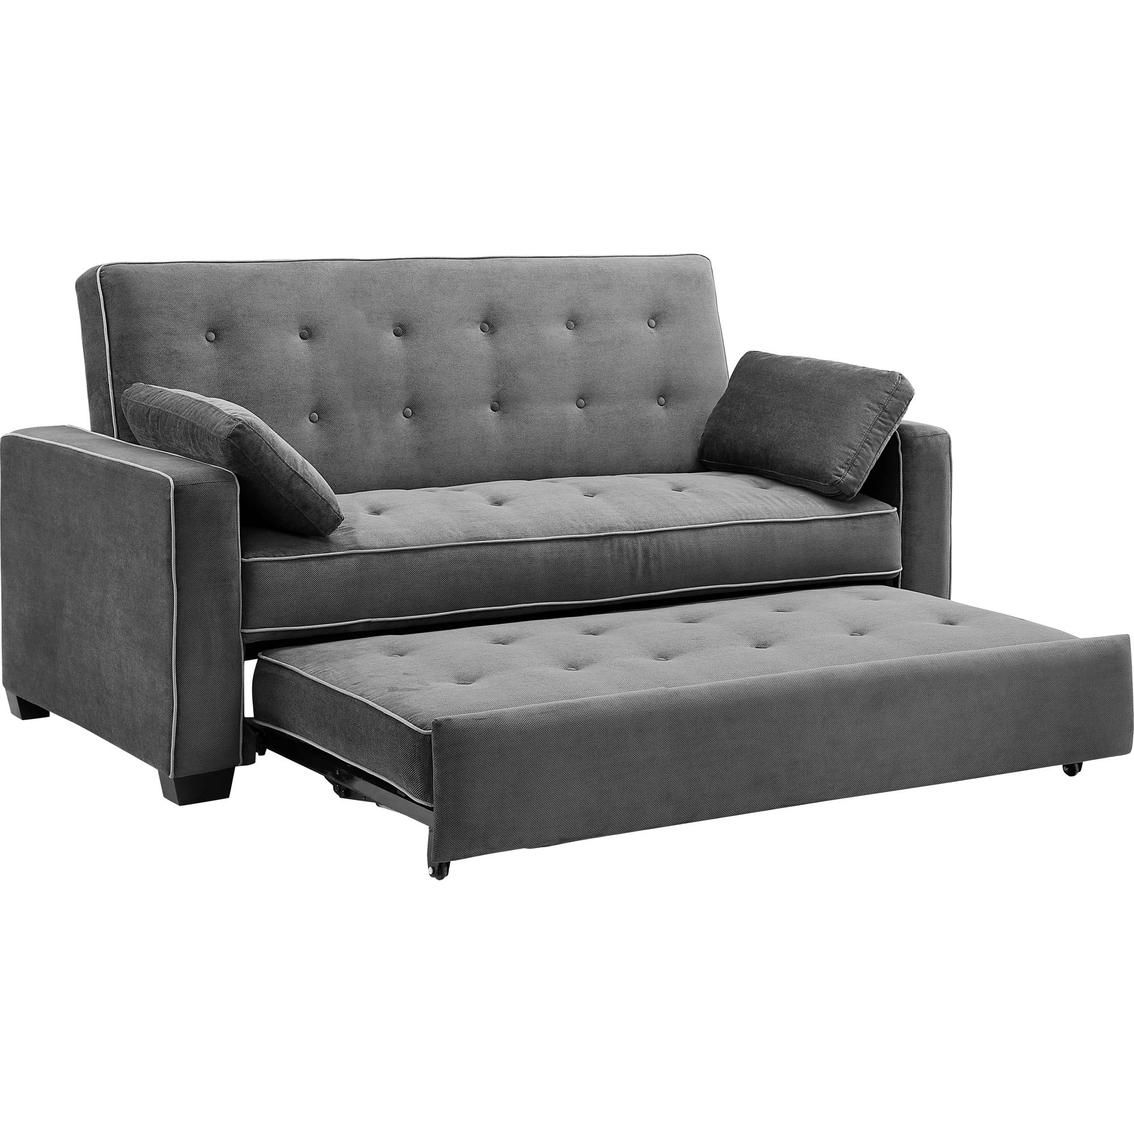 Serta Augustine Convertible Queen Size Sleeper Sofa | Serta Pertaining To Queen Size Convertible Sofa Beds (View 8 of 20)